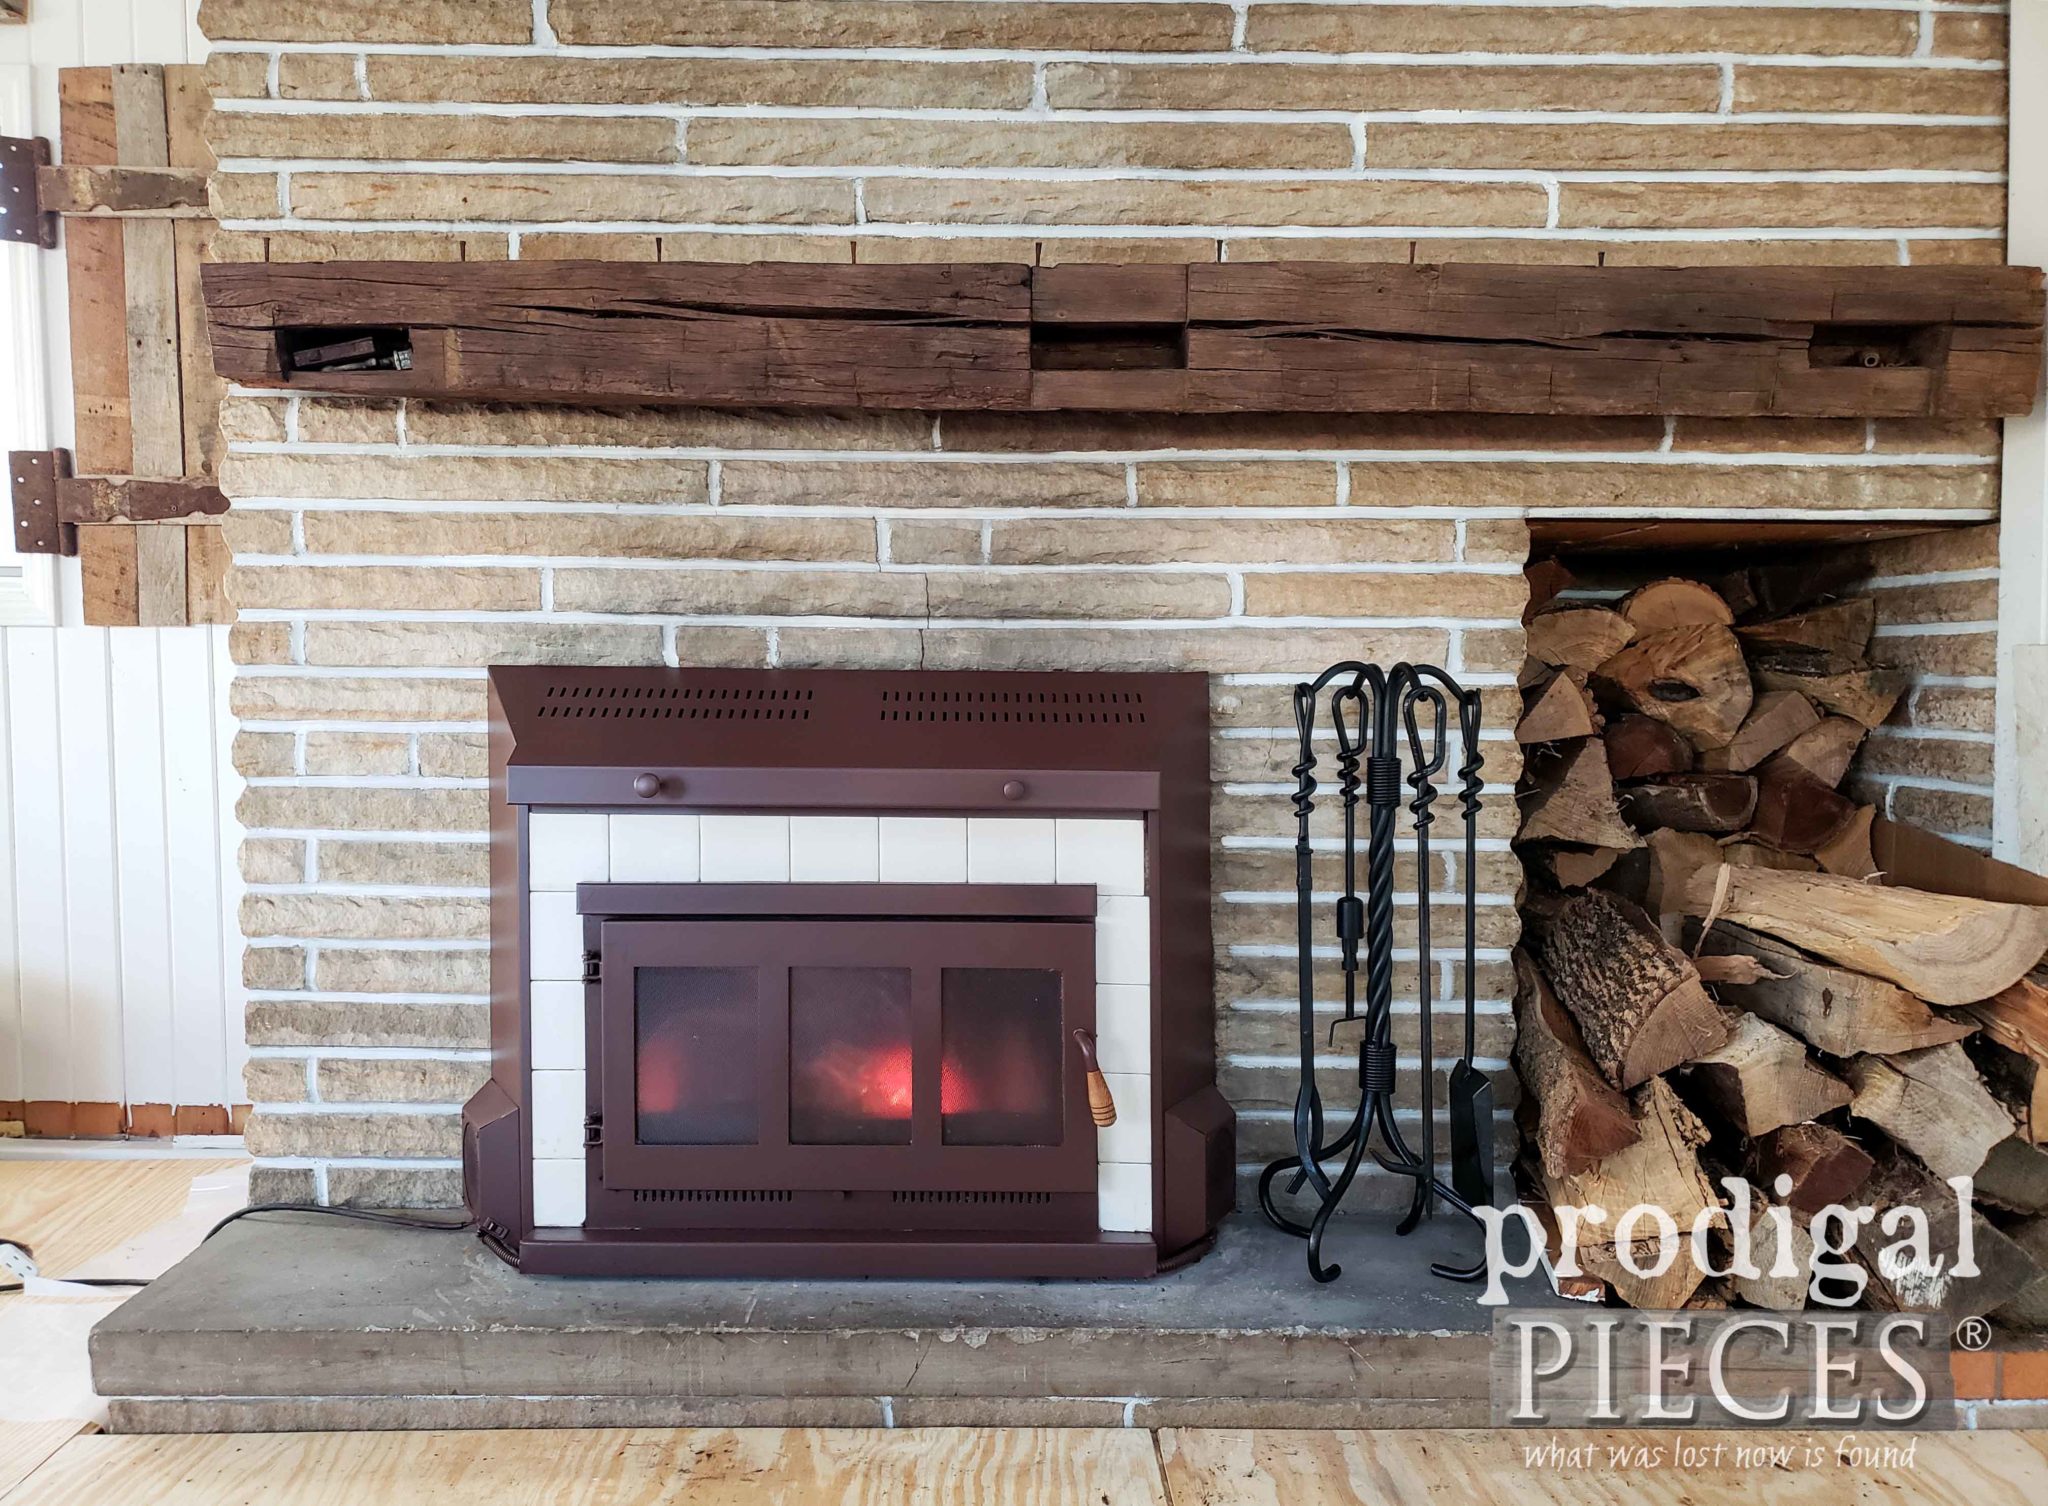 Farmhouse Style Painted Fireplace Insert with full step-by-step video tutorial by Larissa of Prodigal Pieces | prodigalpieces.com #prodigalpieces #diy #video #home #homedecor #homedecorideas